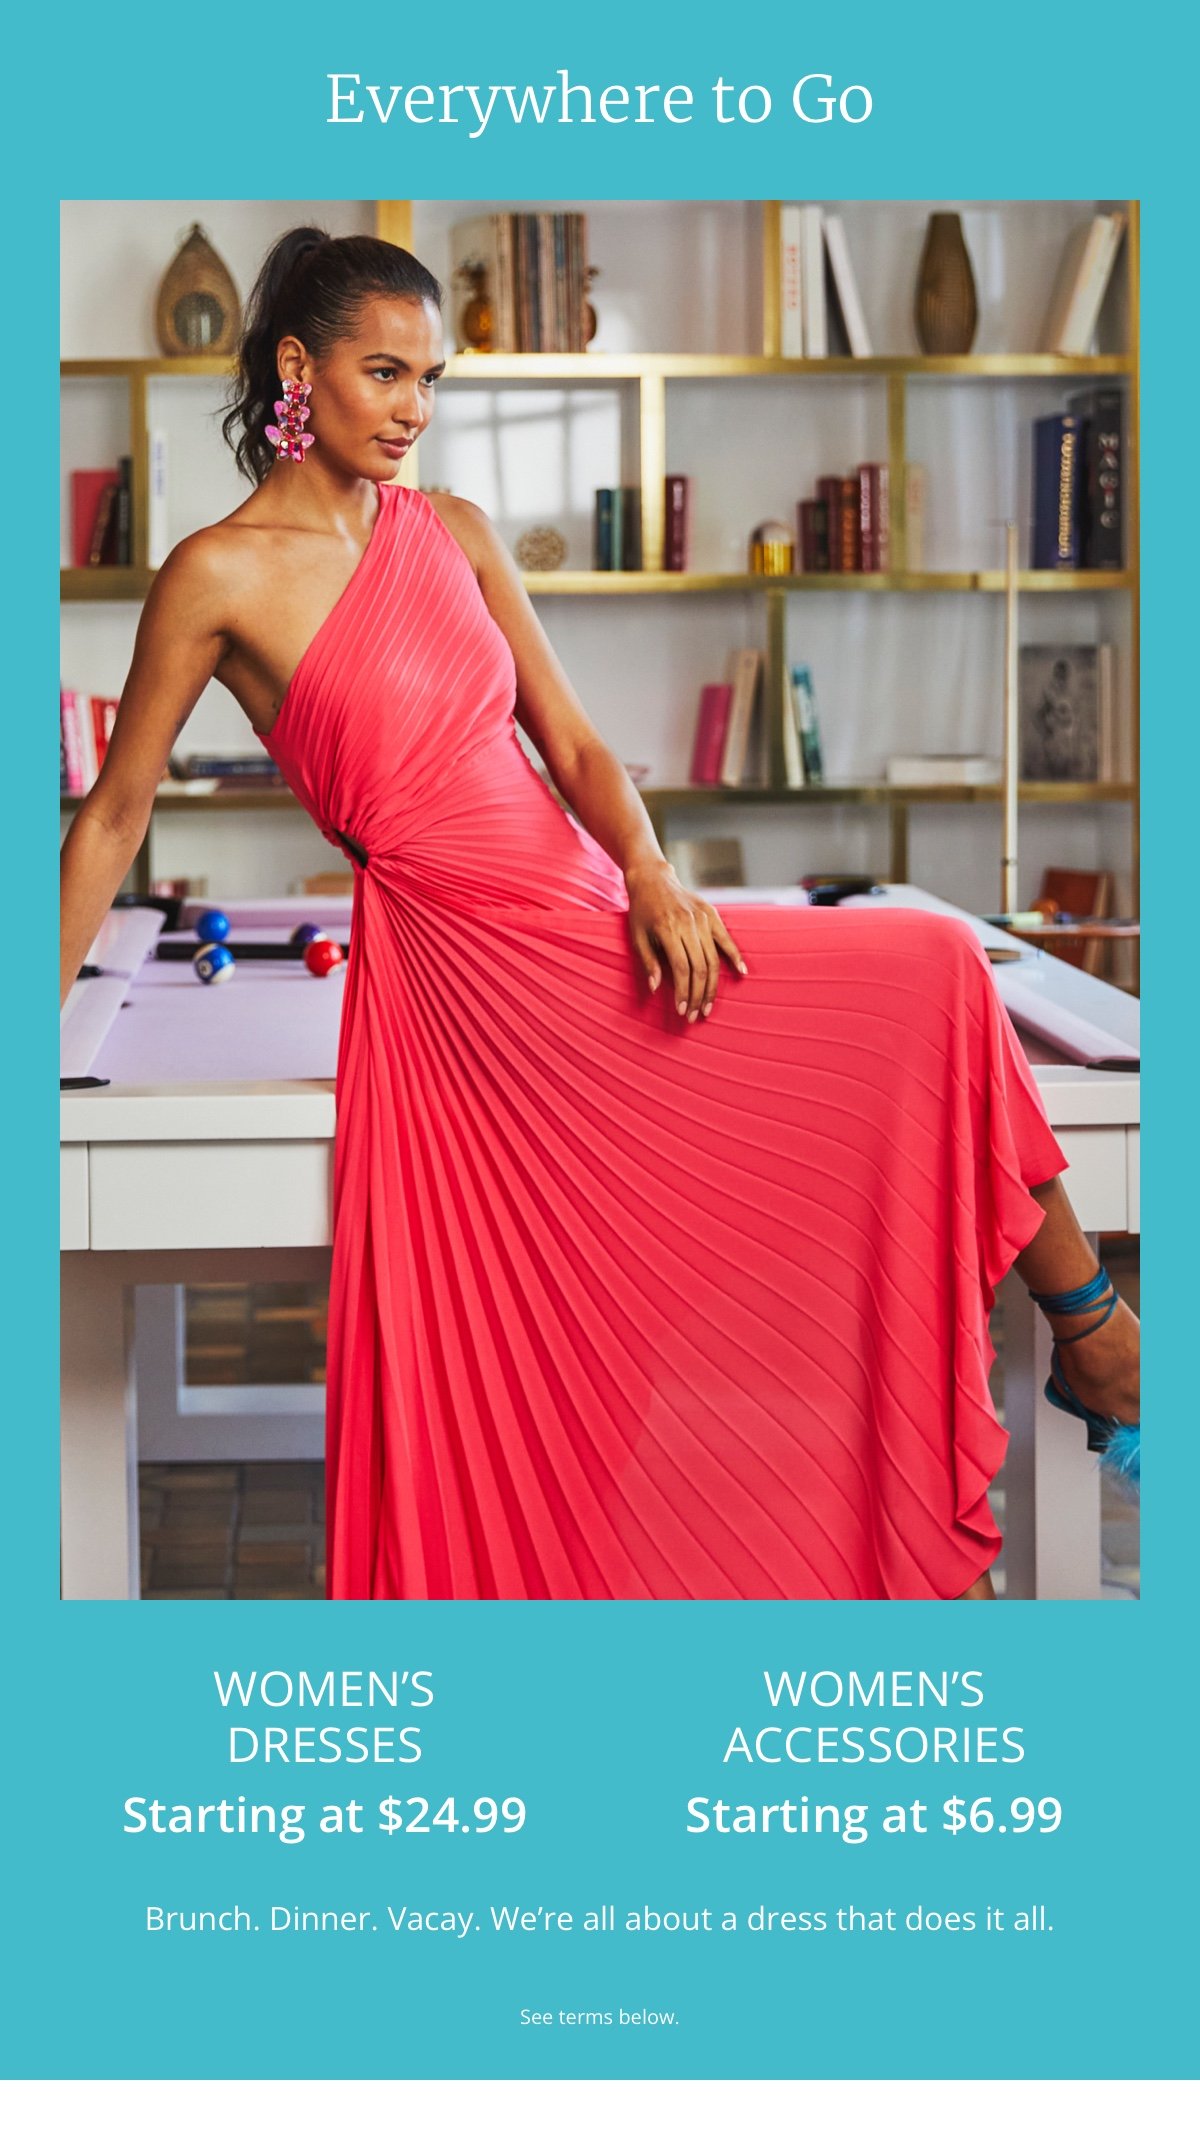 Everywhere to Go|Women’s Dresses|Starting at \\$24.99|Women’s Accessories|Starting at \\$6.99|Brunch. Dinner. Vacay. We’re all about a dress that does it all.|See terms below.